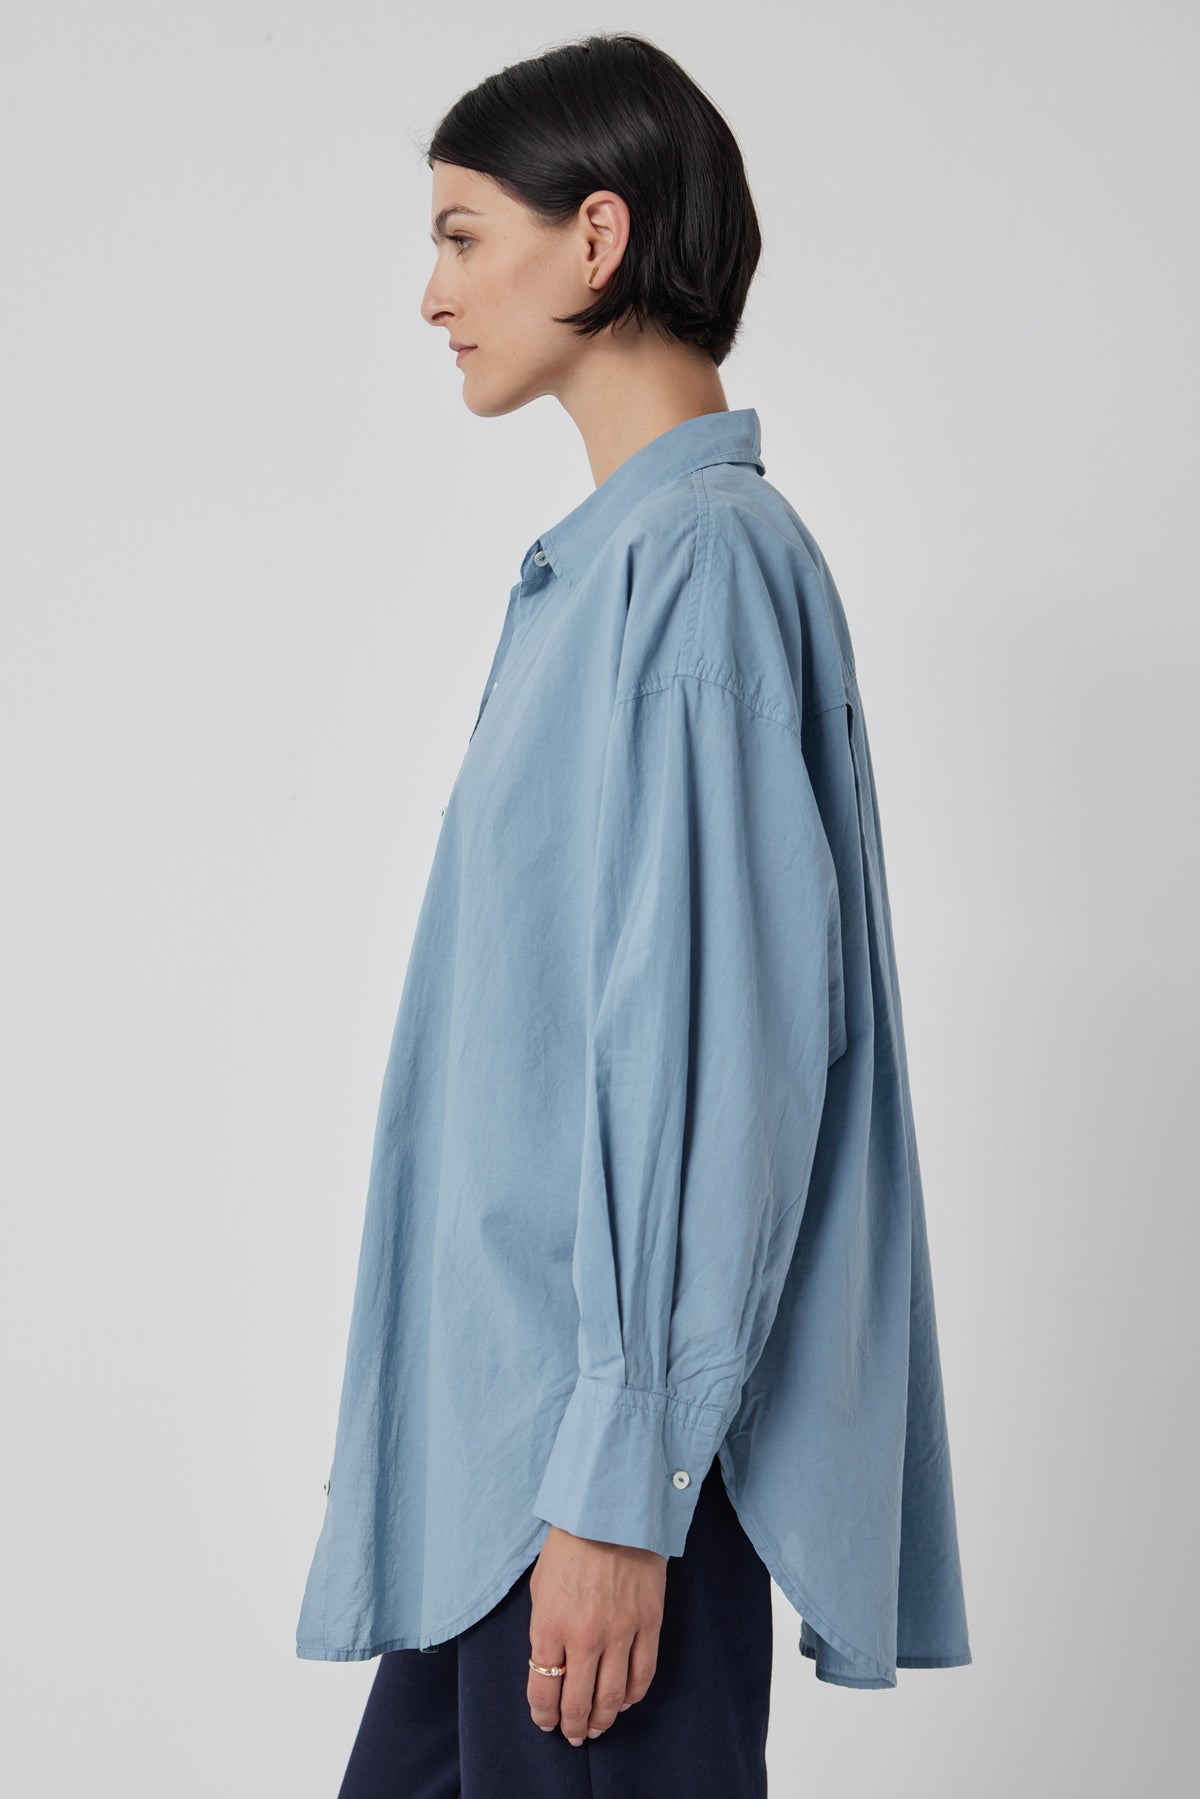 The back view of a woman wearing an oversized blue cotton Velvet by Jenny Graham REDONDO BUTTON-UP SHIRT with drop shoulder.-36168811020481